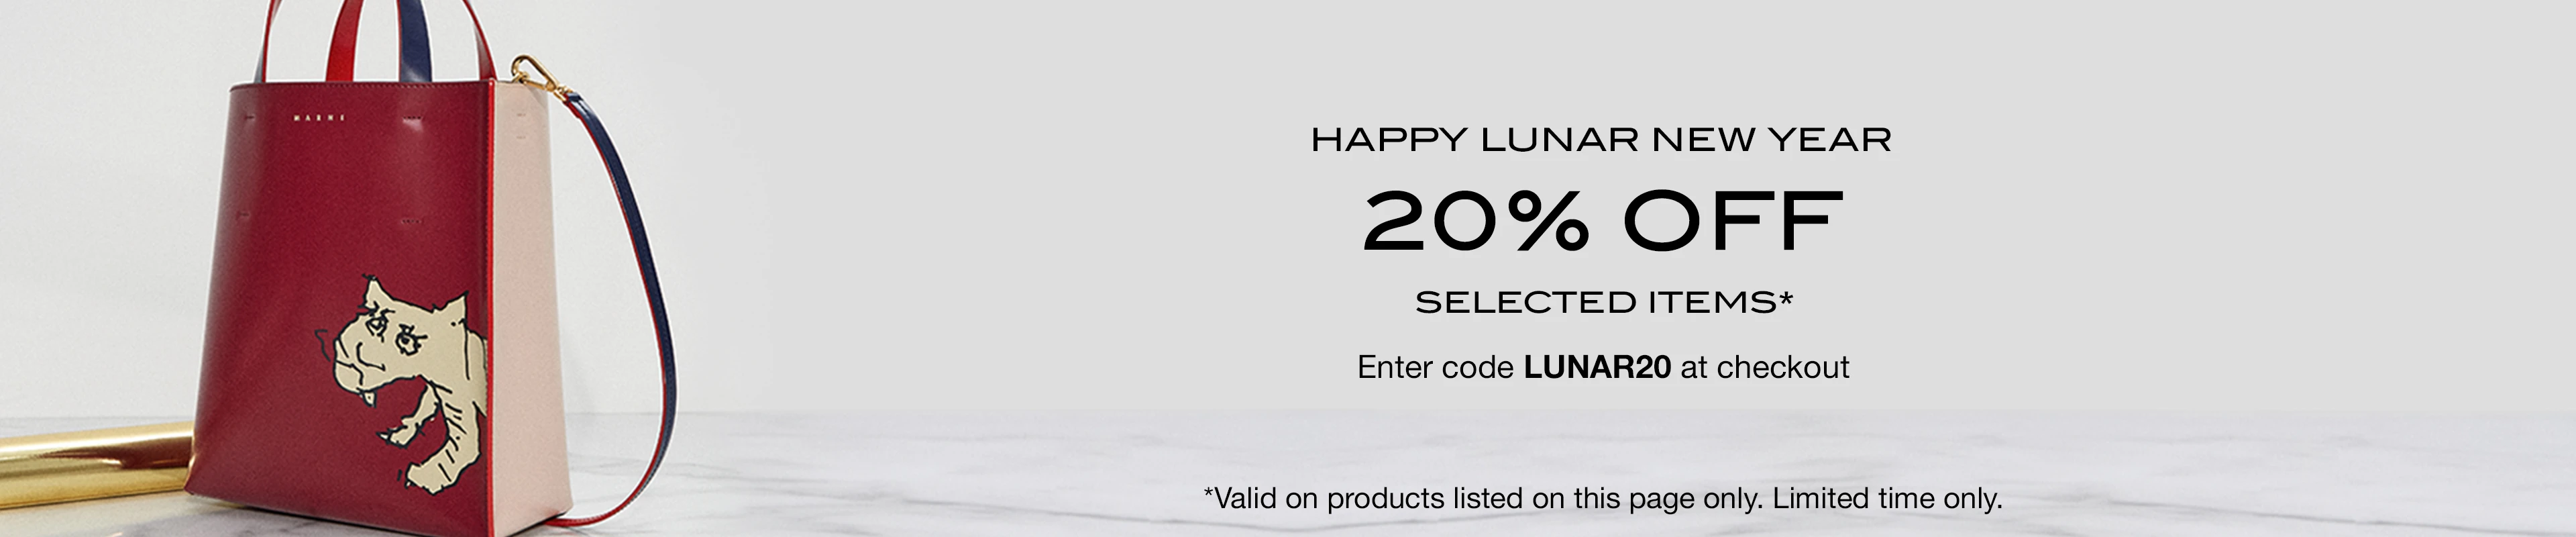 Matchesfashion extra 20% OFF on selected sale items with promo code